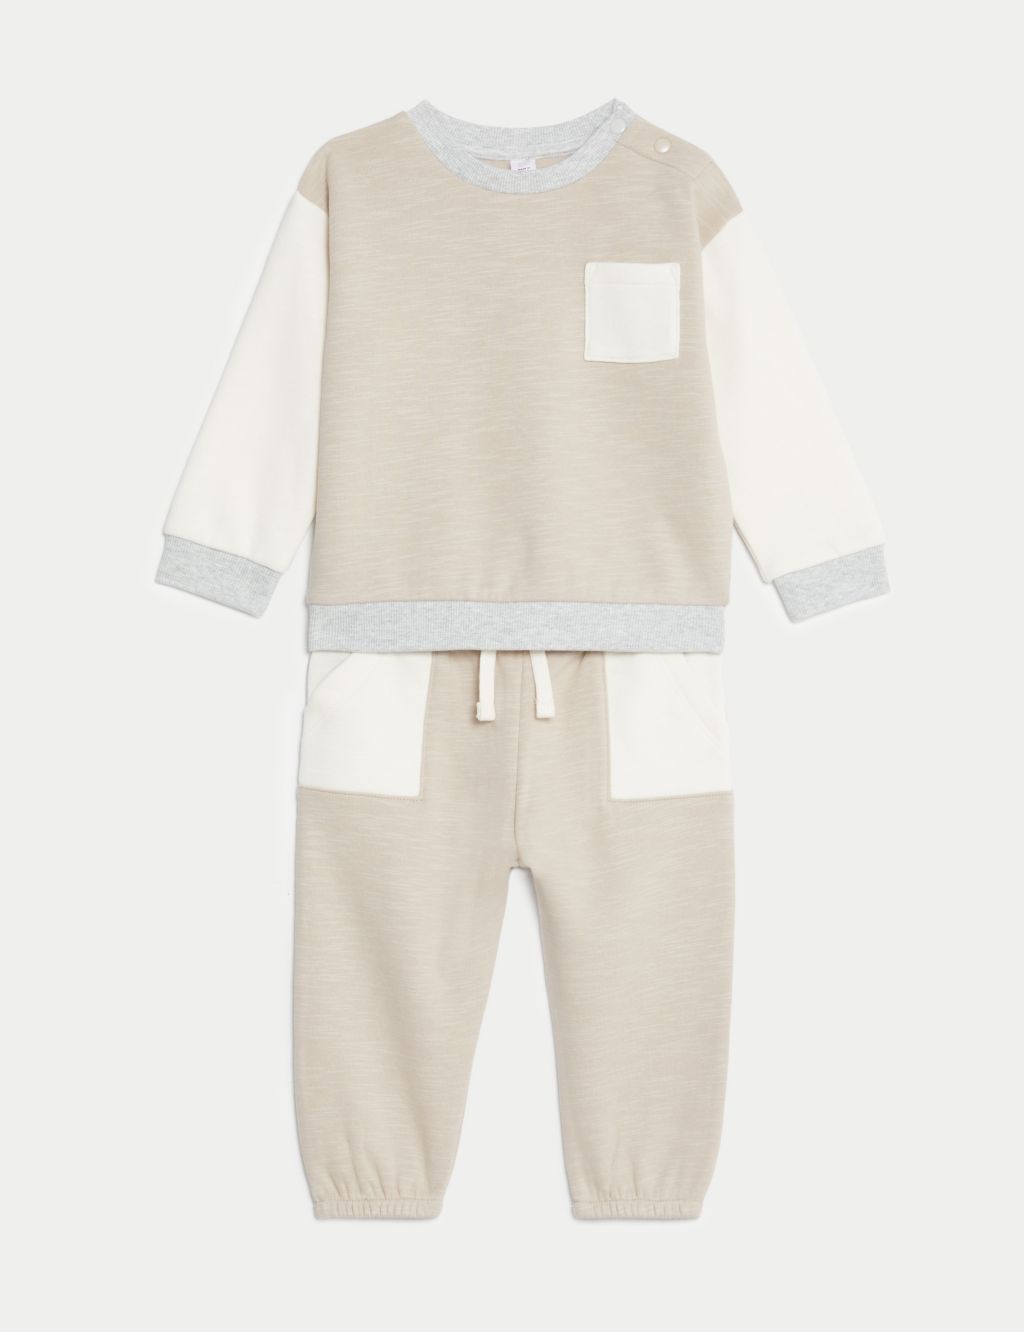 2pc Cotton Rich Outfit (0-3 Yrs) image 2